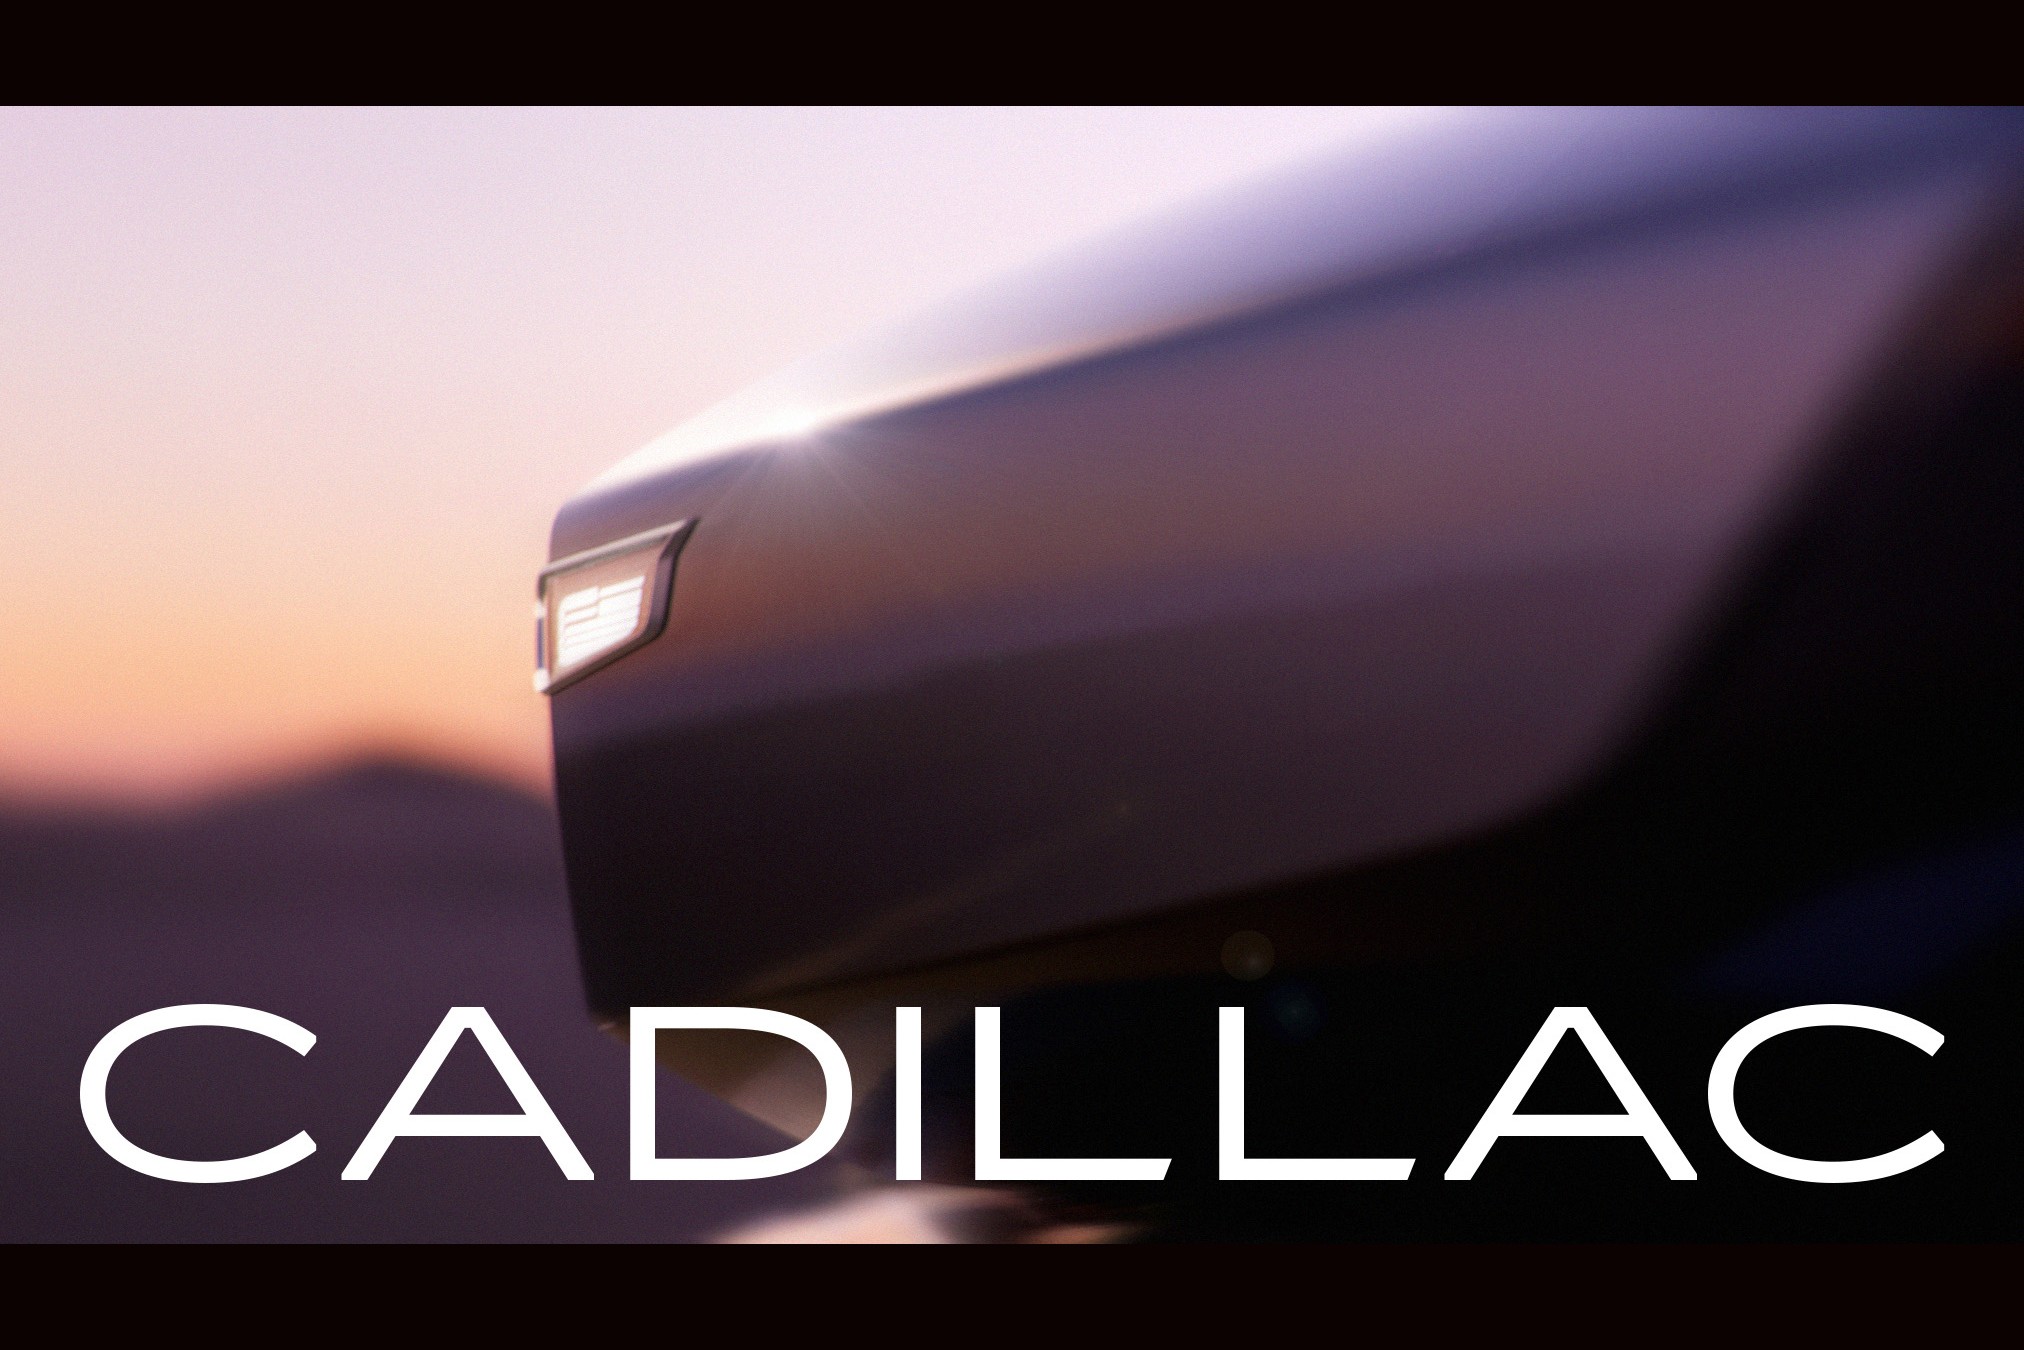 Cadillac Celebrates 20 Years of V-Series with Concept Car Teaser Focused on Electric Performance